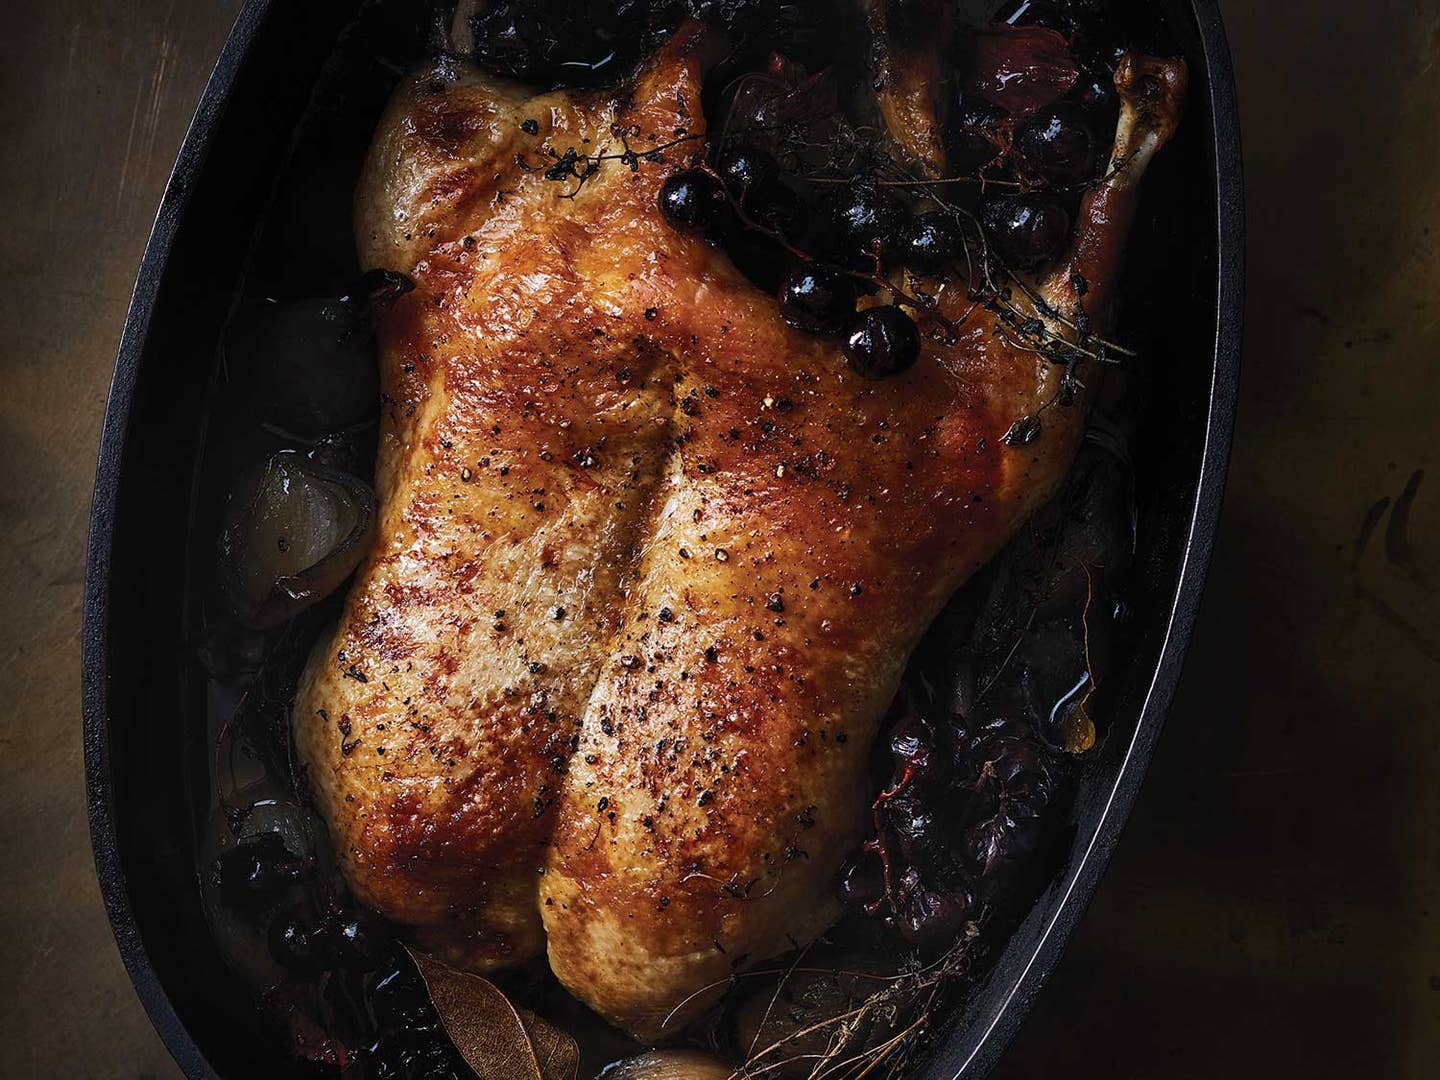 The Winemaker’s Roast Duck with Shallots and Concord Grapes